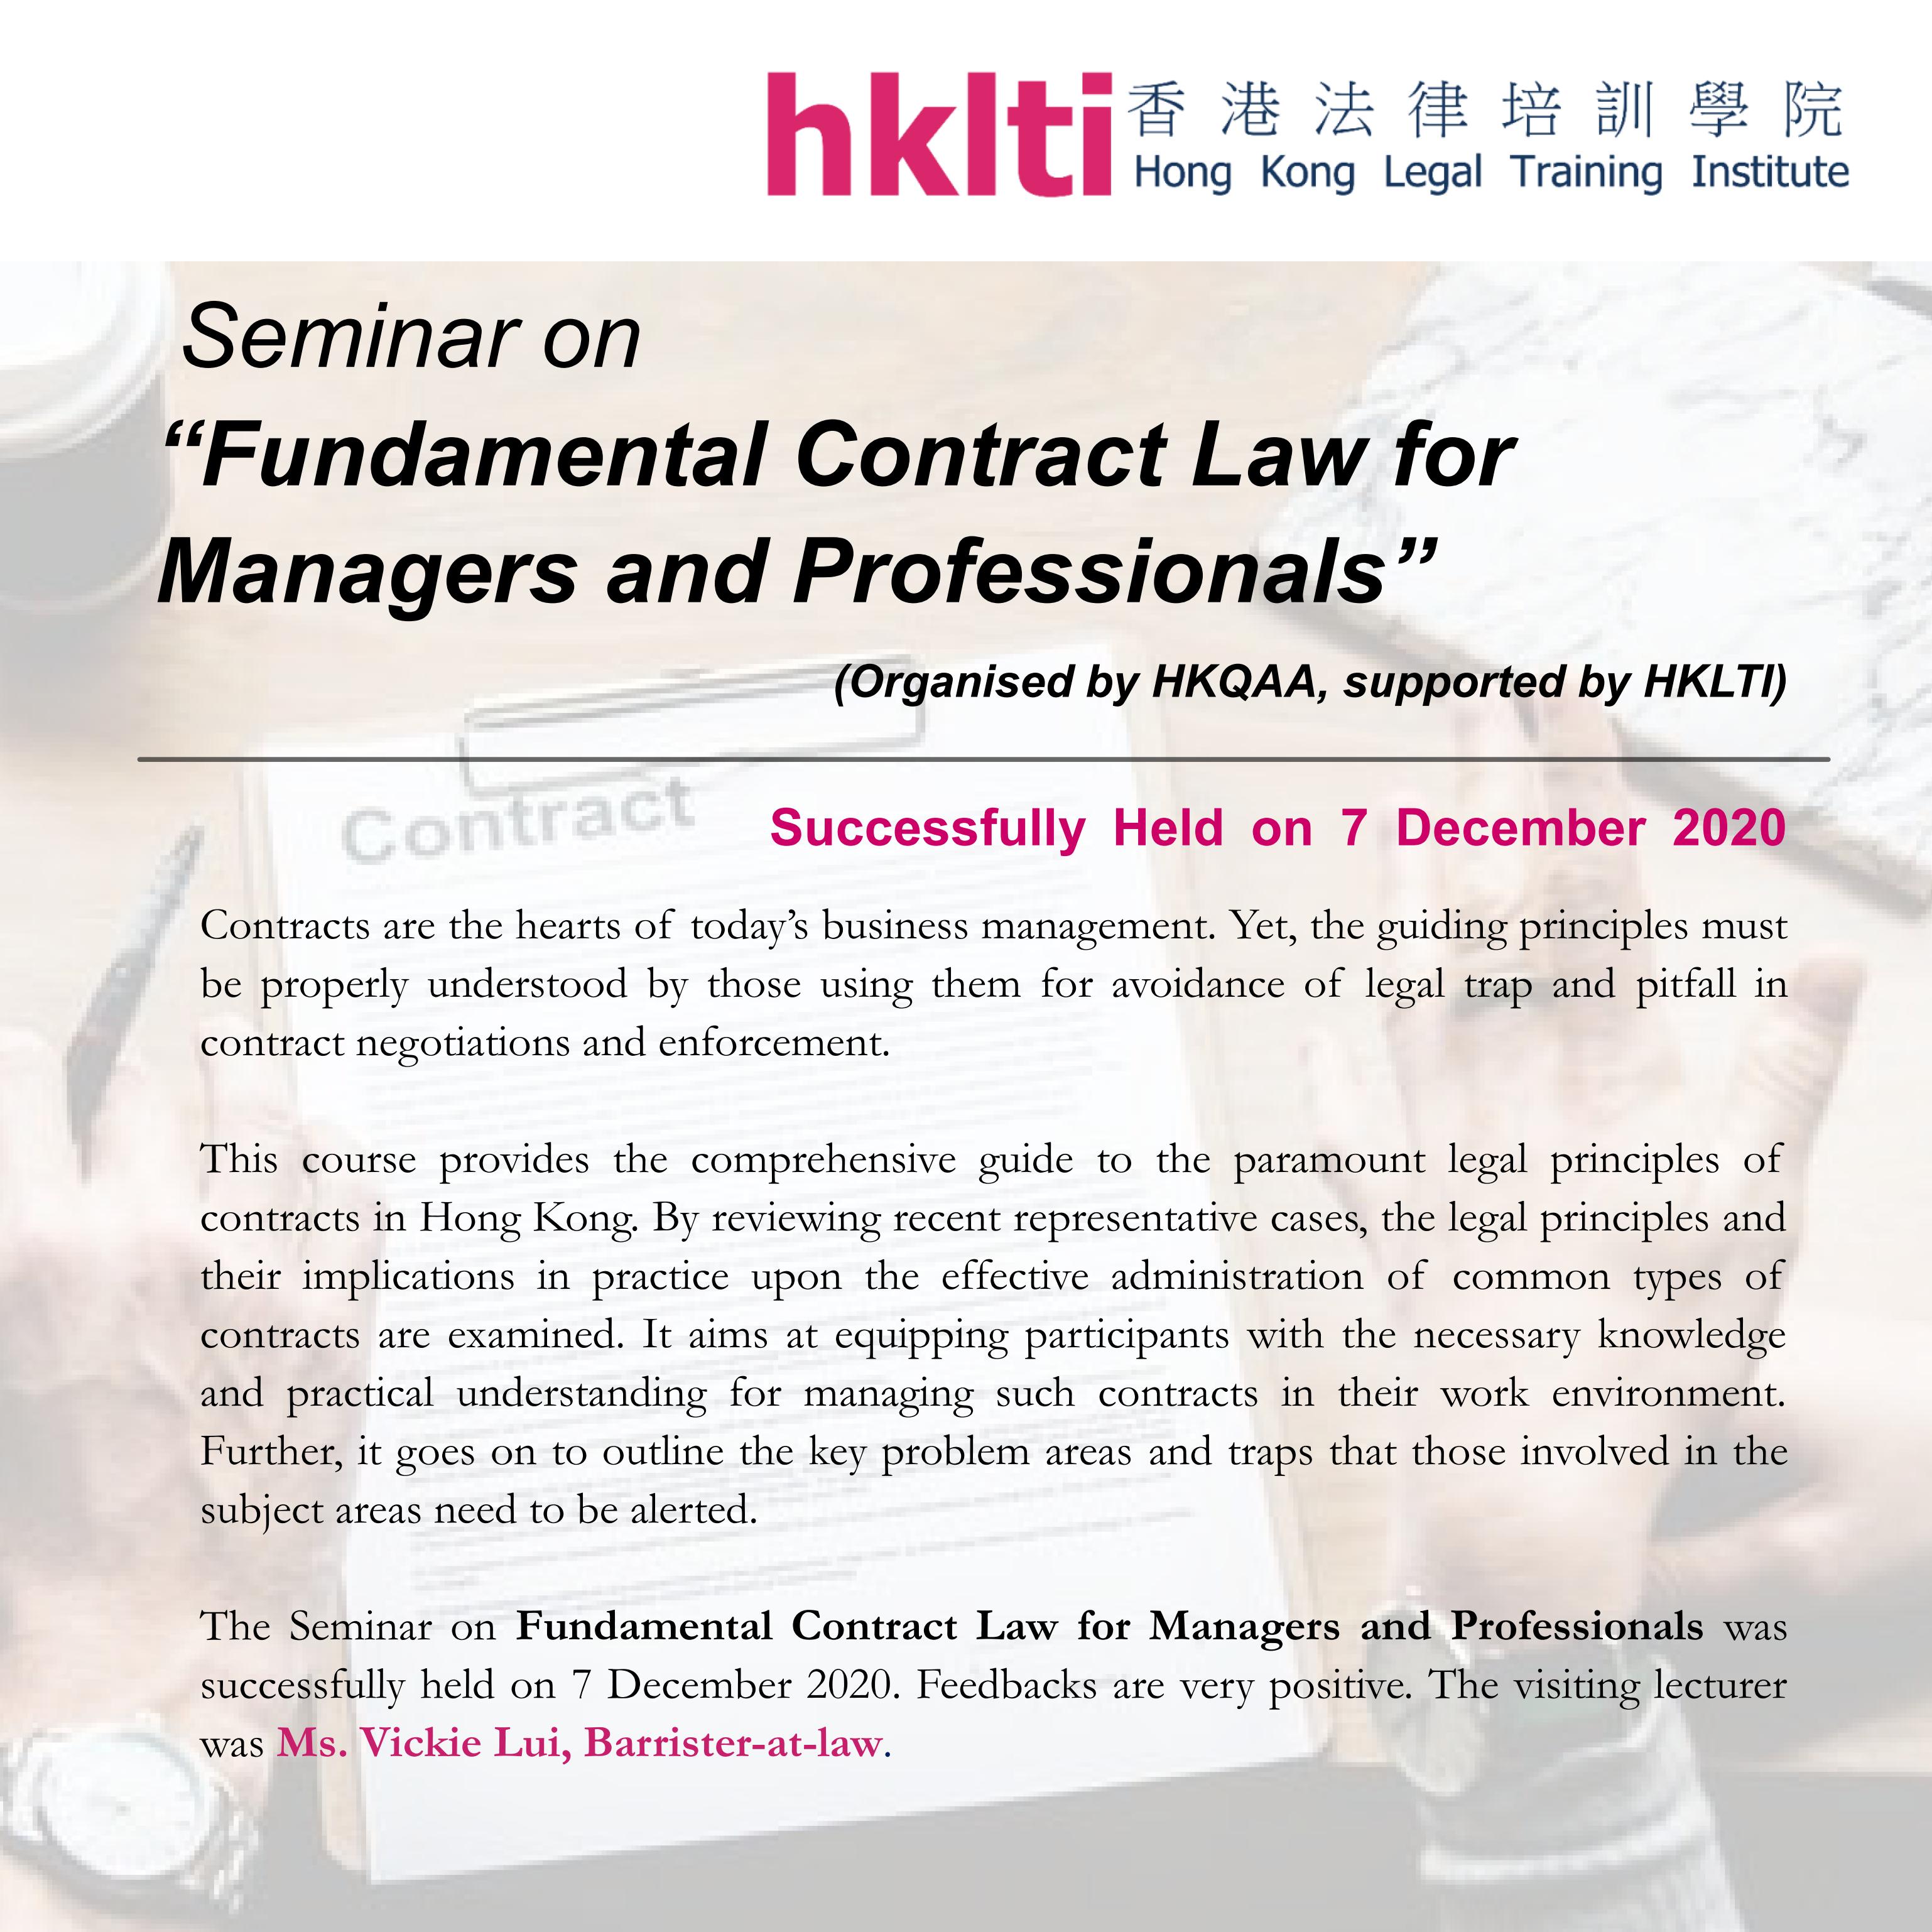 hklti hkqaa fundamental contract law for mangers and professionals seminar report 20201207